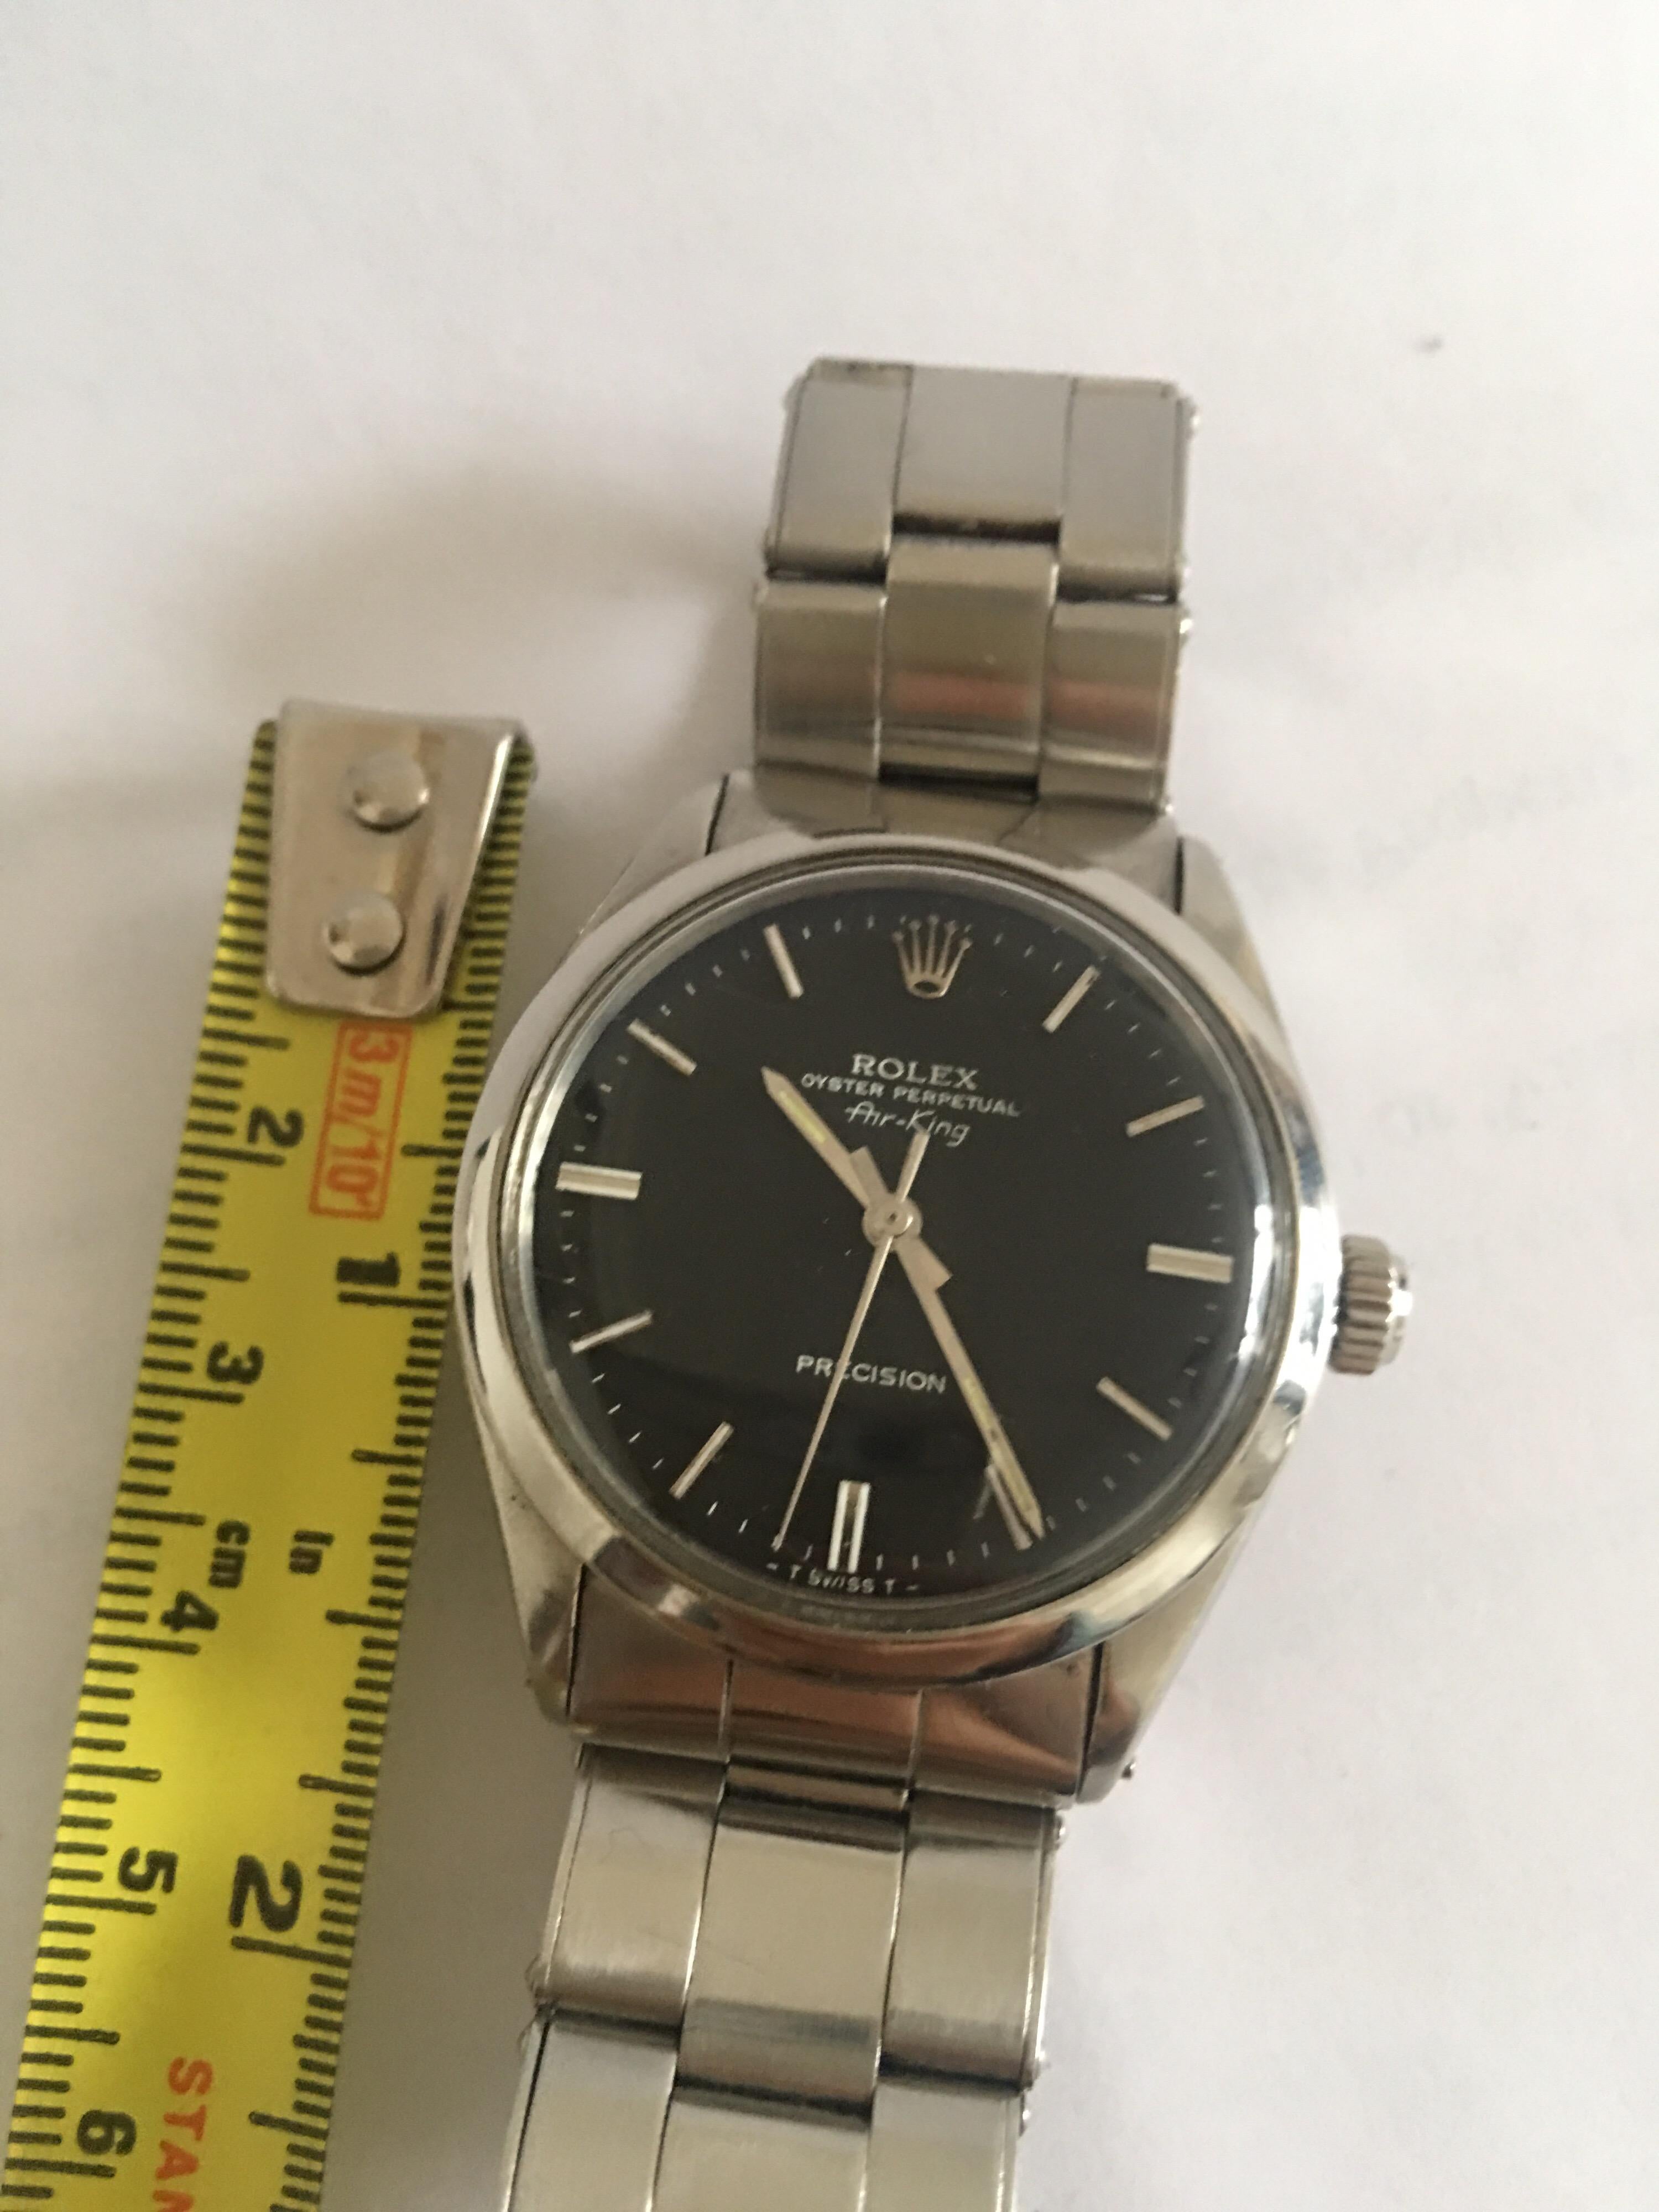 Vintage 1960s Rolex Oyster Perpetual Air-King Precision, 1520 For Sale 6